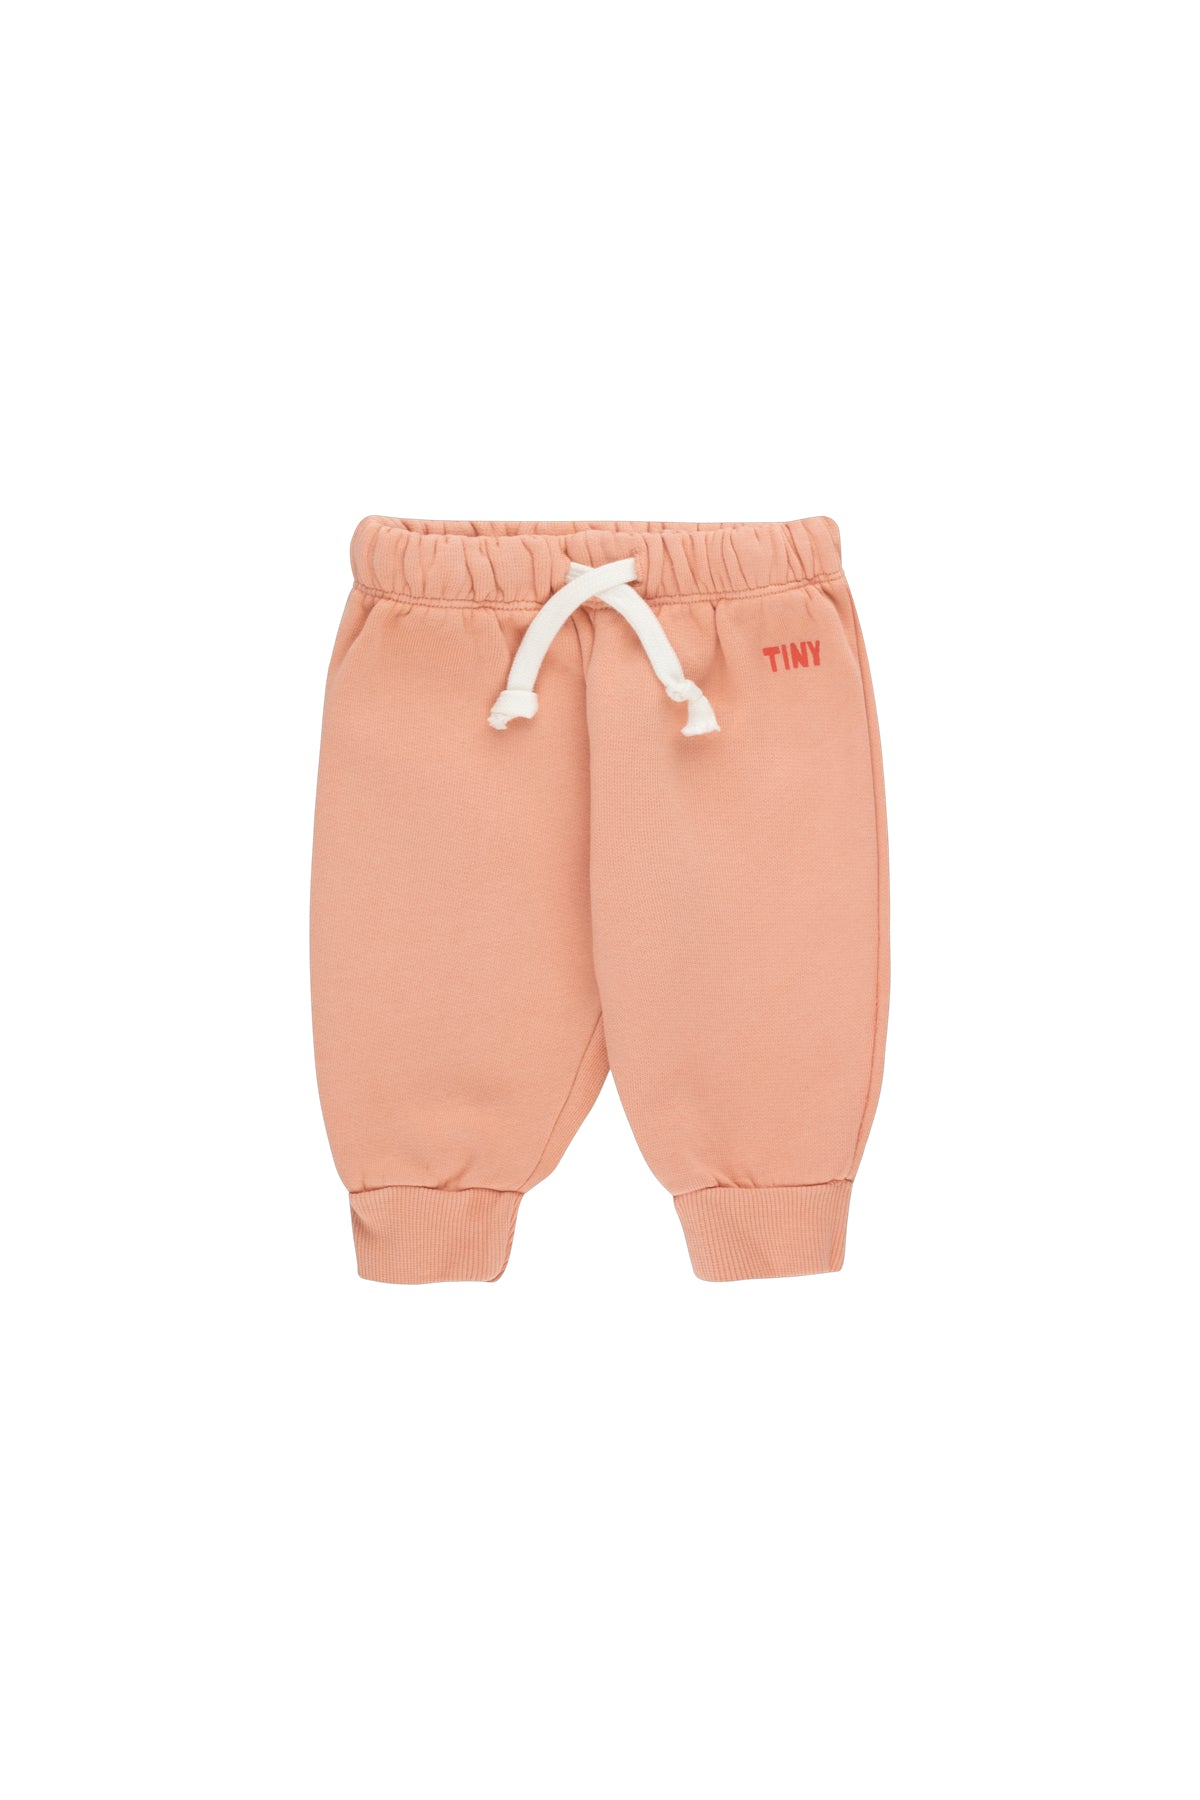 Tiny Cottons Solid Baby Sweatpant - Rose